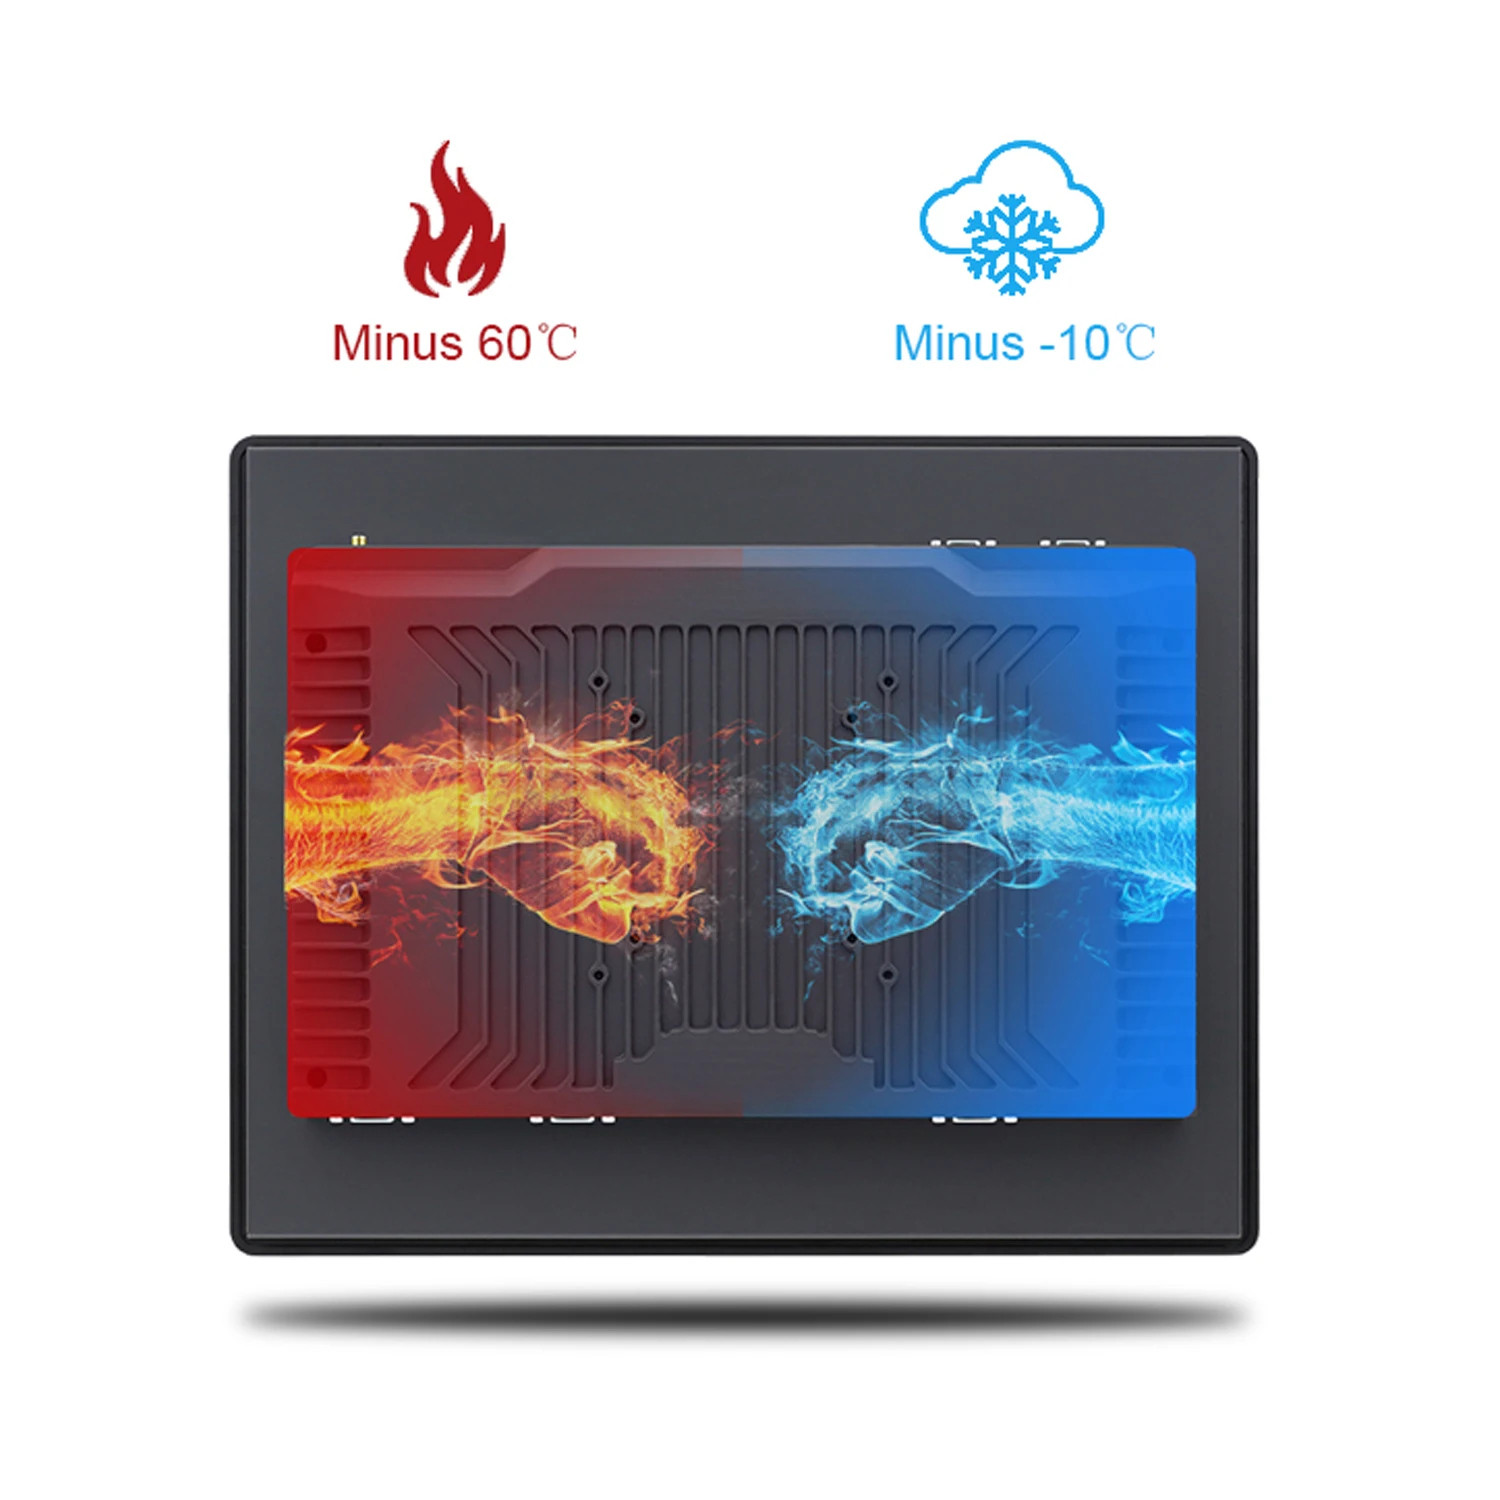 17 19 21 Inch Embedded Industrial All In One Computer with Resistive Touch Screen Mini Tablet PC with RS232 Com WiFi 1280*1024 enlarge